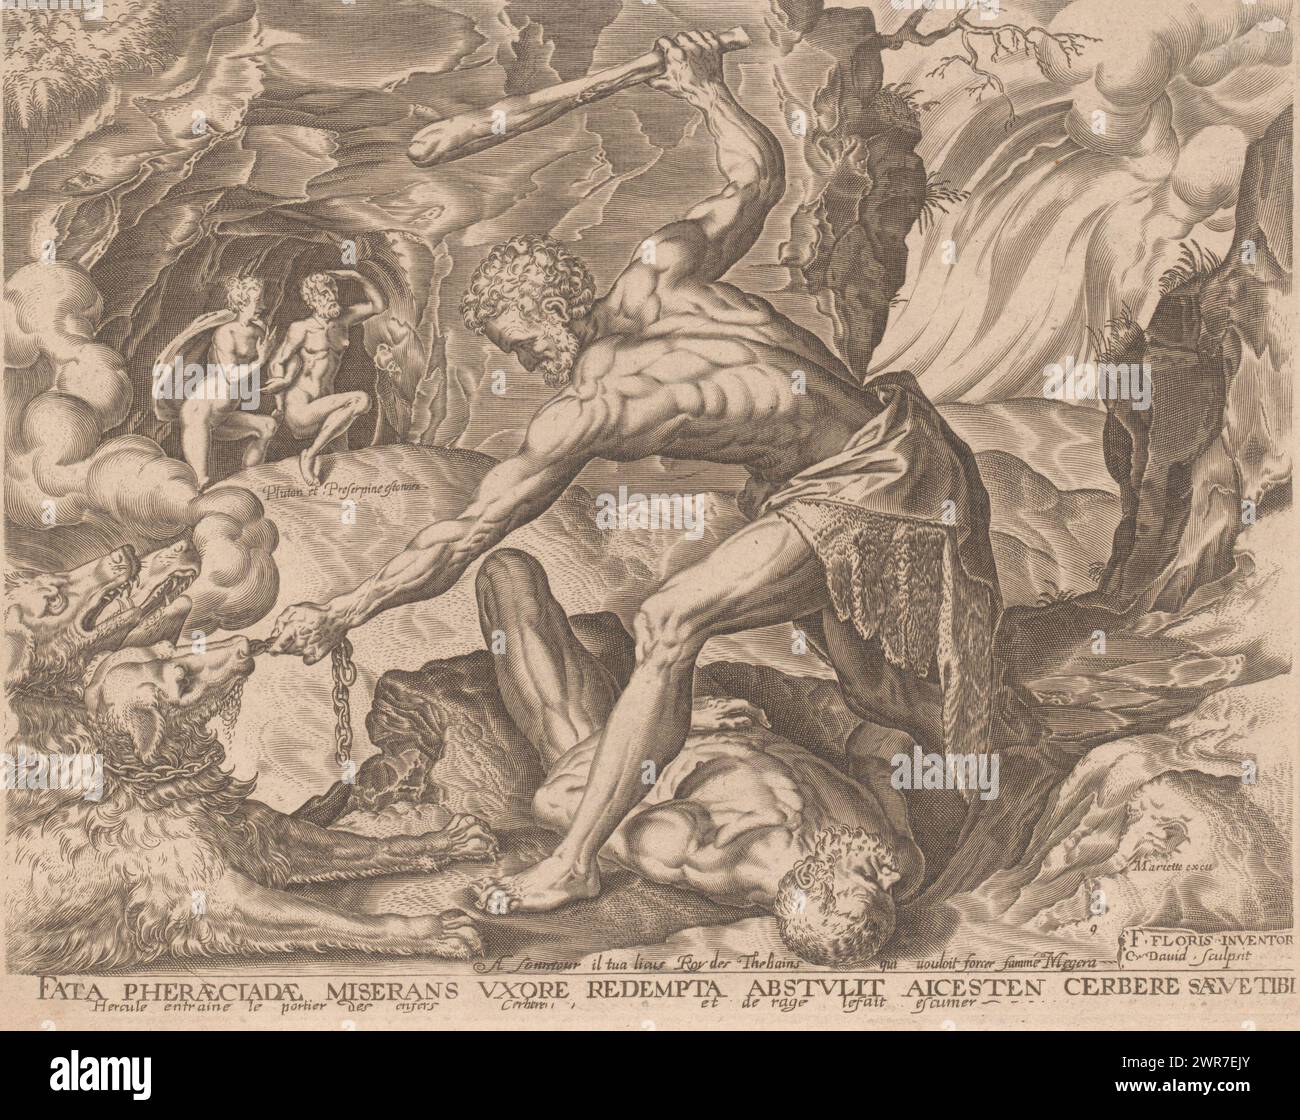 Hercules conquers Cerberus, Labors of Hercules after Frans Floris (series title), numbered bottom right: 9., print maker: Charles David, after design by: Frans Floris (I), after print by: Cornelis Cort, print maker: France, publisher: Paris, 1613 - 1638, paper, engraving, height 224 mm × width 285 mm, print Stock Photo